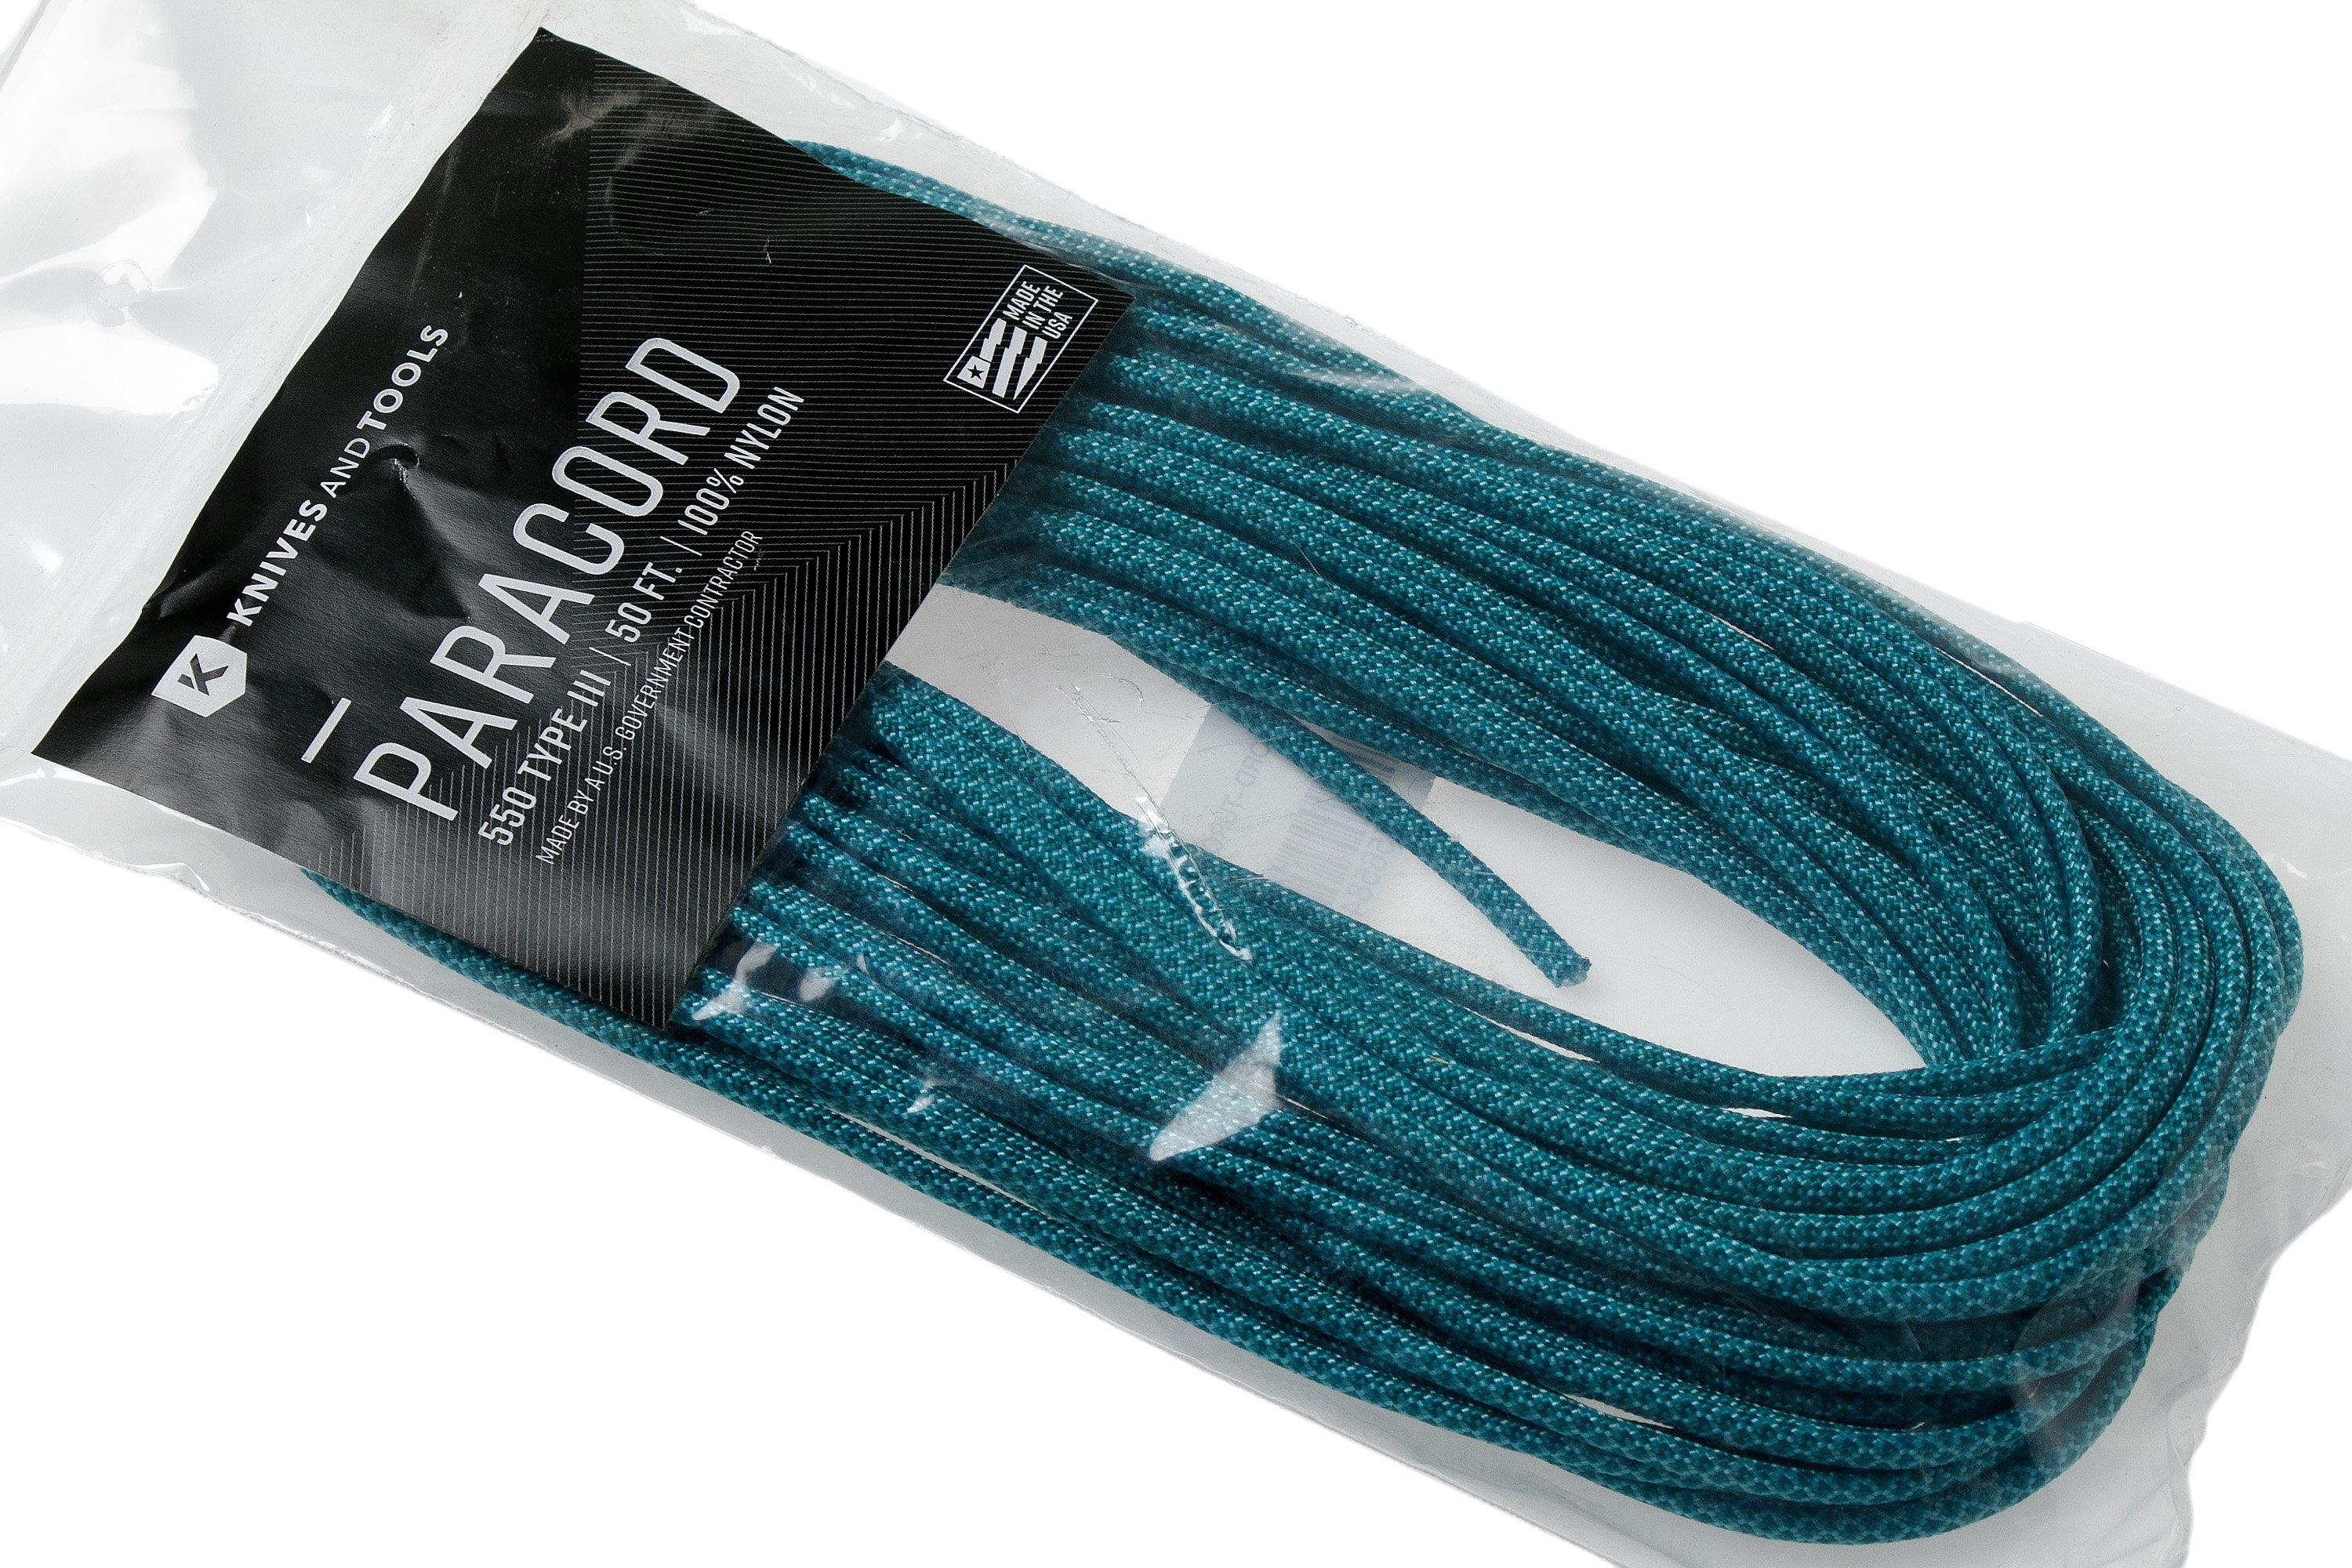 Knivesandtools 550 paracord type III, colour: turquoise with teal